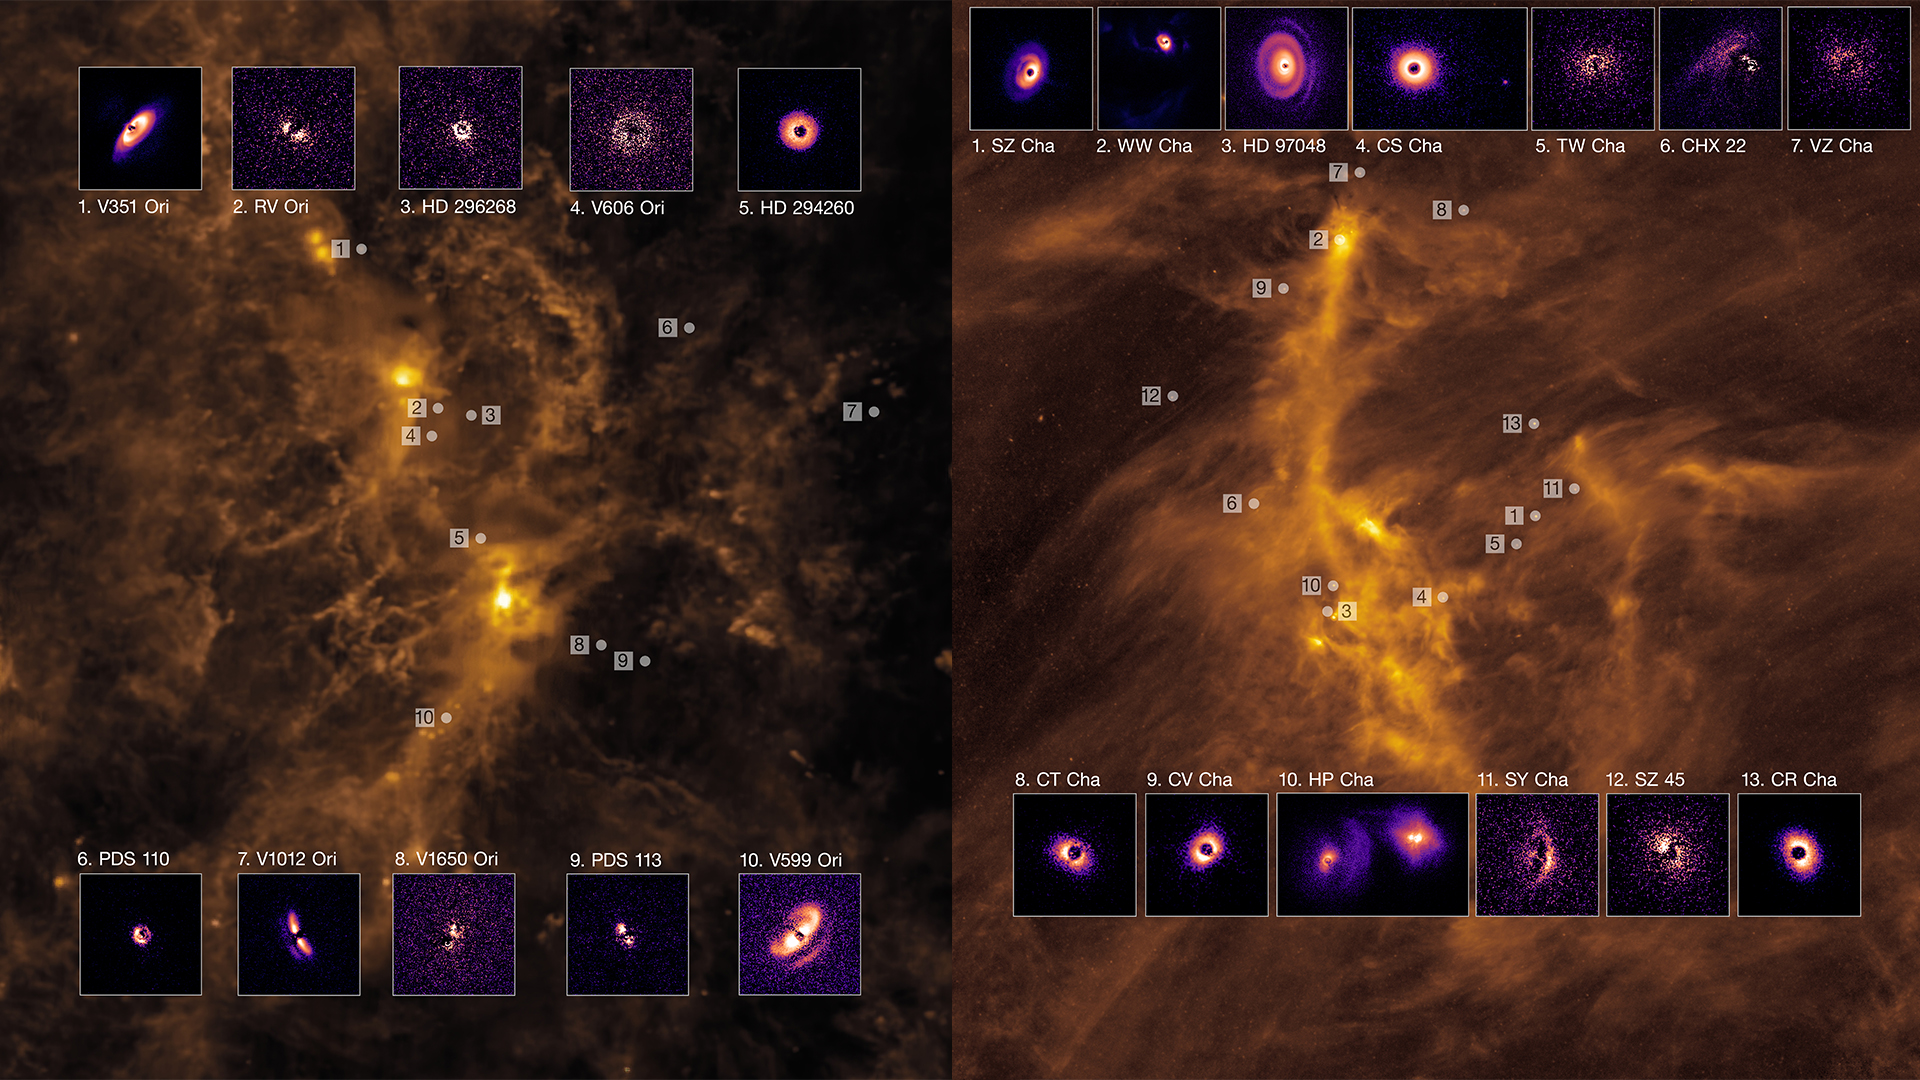 The remaining discs overlayed to their respective nebulae. Once again very different structures